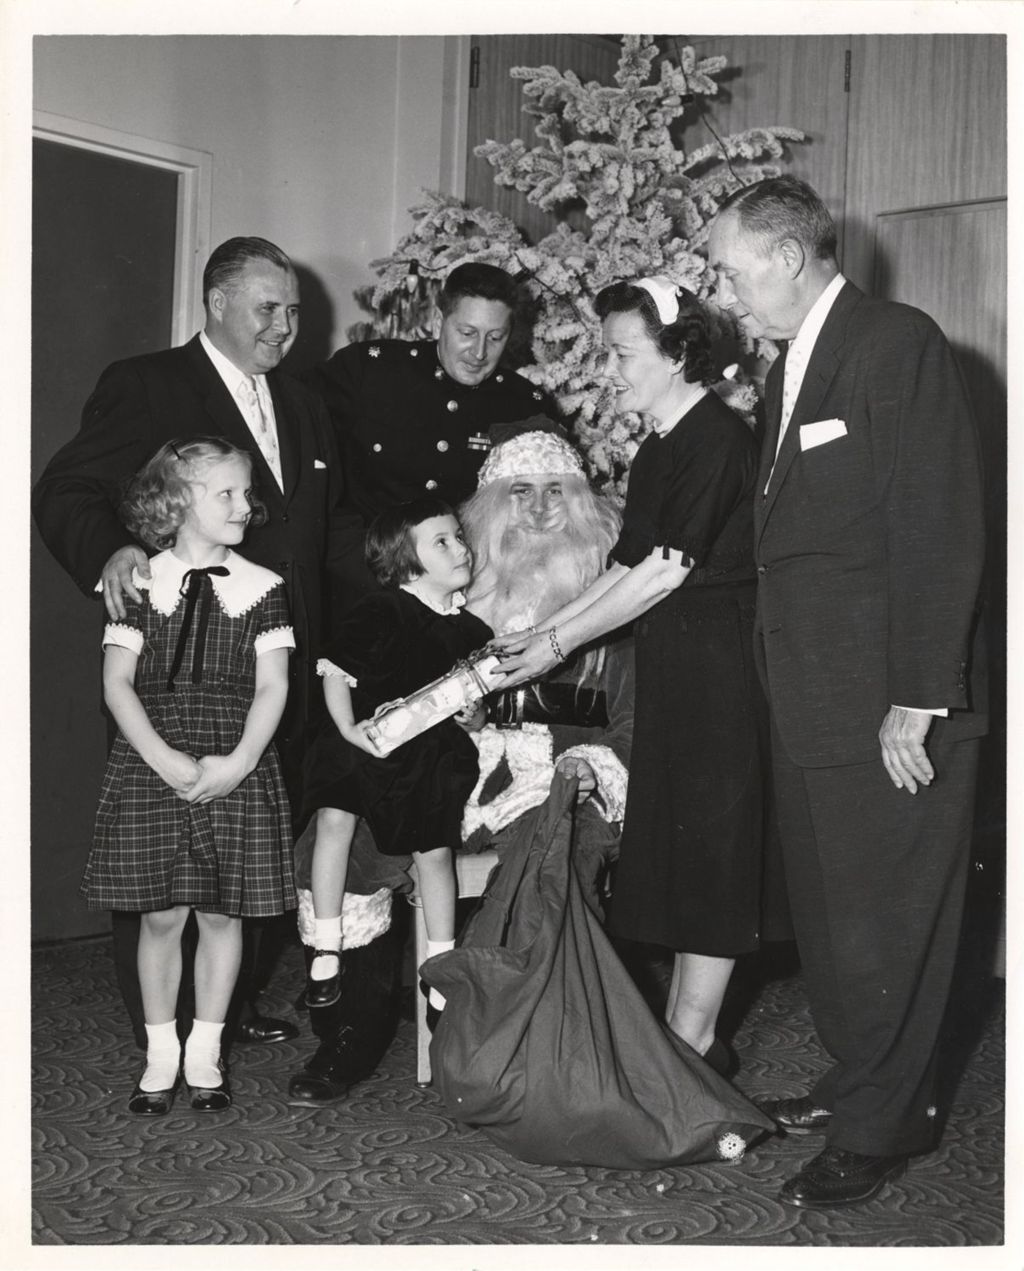 Miniature of Eleanor Daley gives a gift to a child on Santa's lap